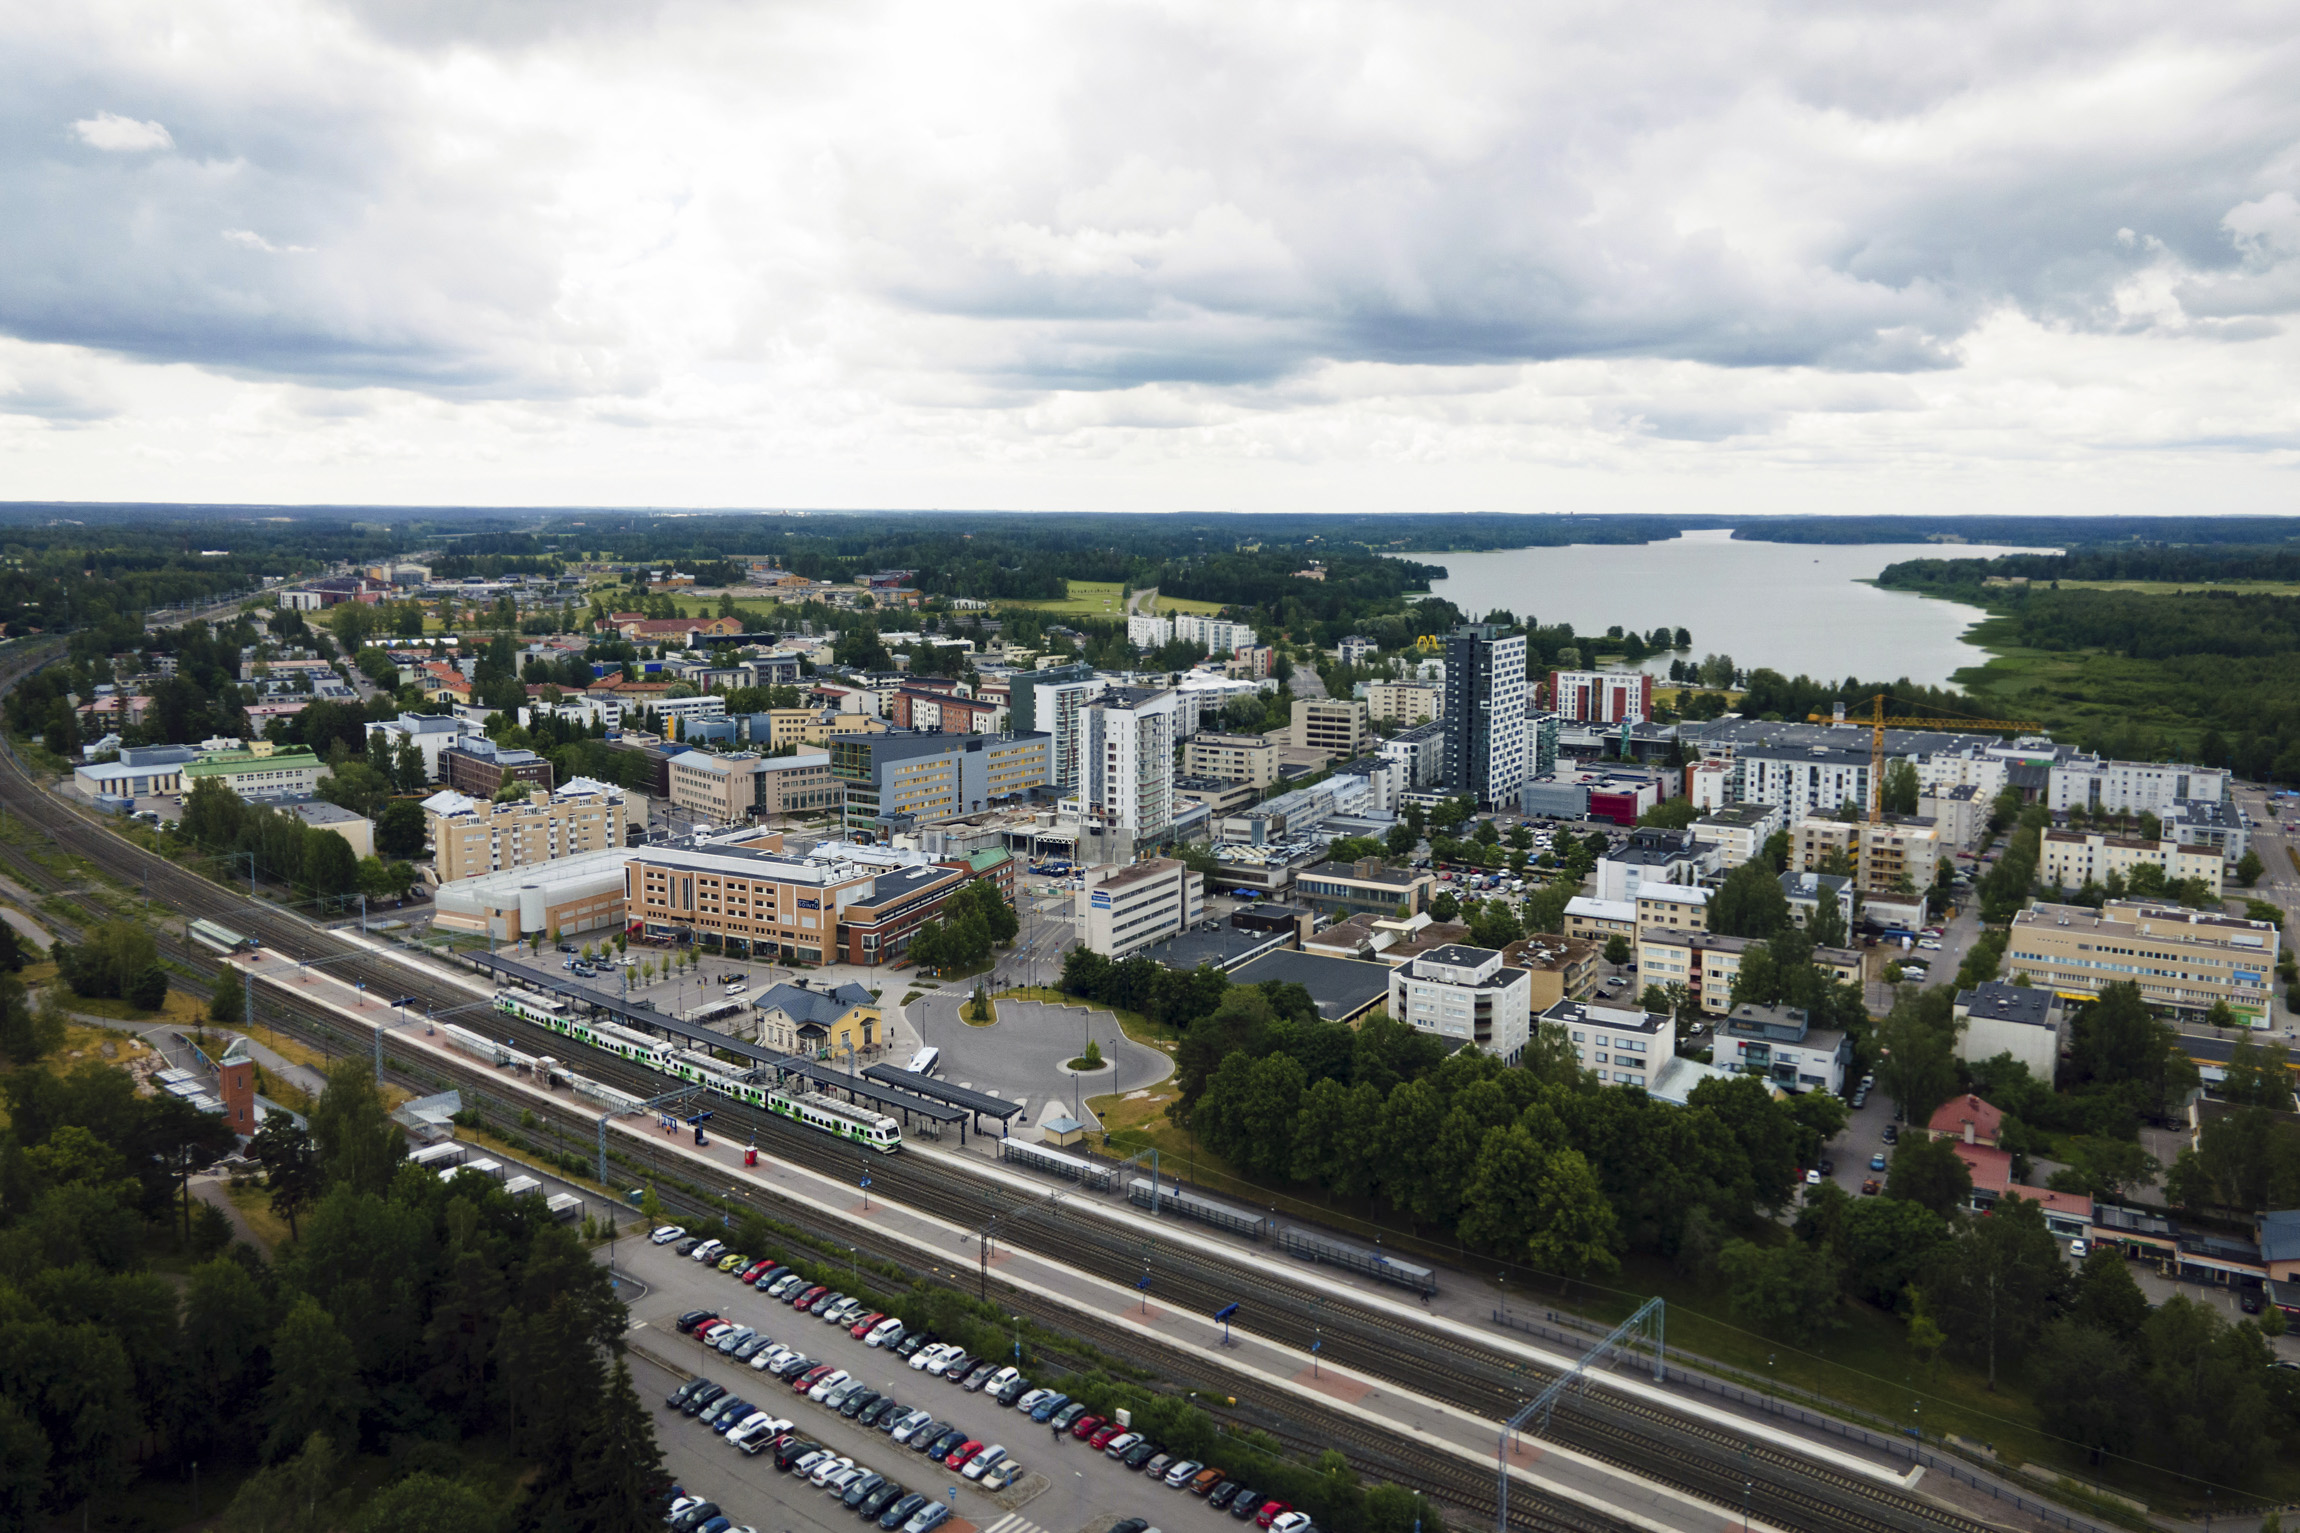 View of Järvenpää city centre and Lake Tuusula from the air.